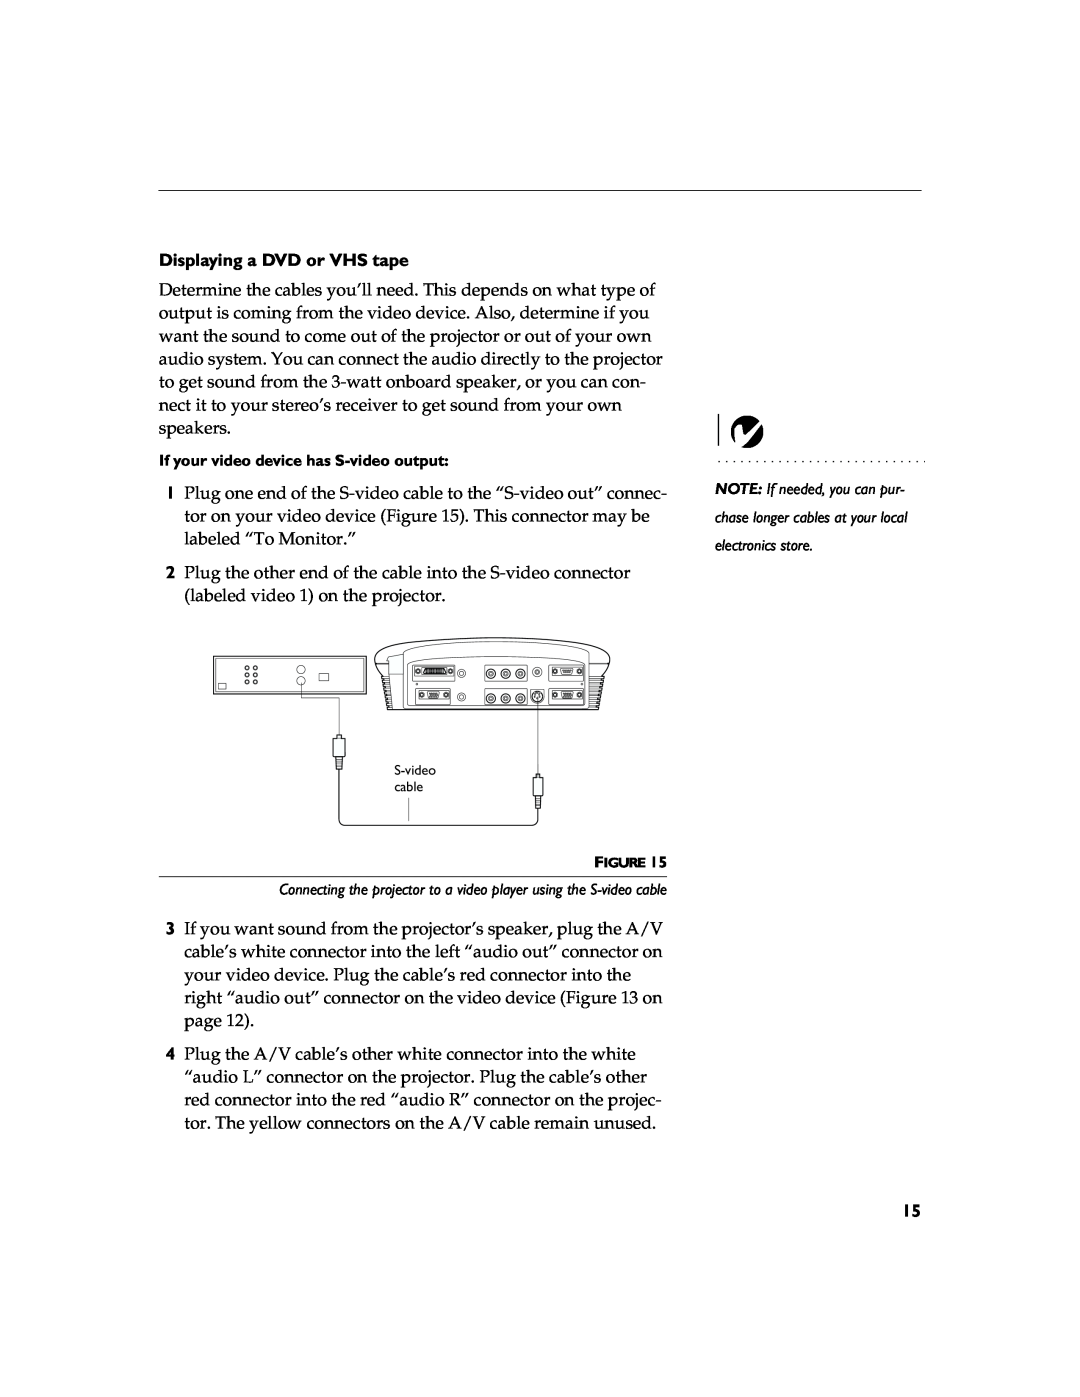 BOXLIGHT 12SF manual Displaying a DVD or VHS tape, If your video device has S-video output 